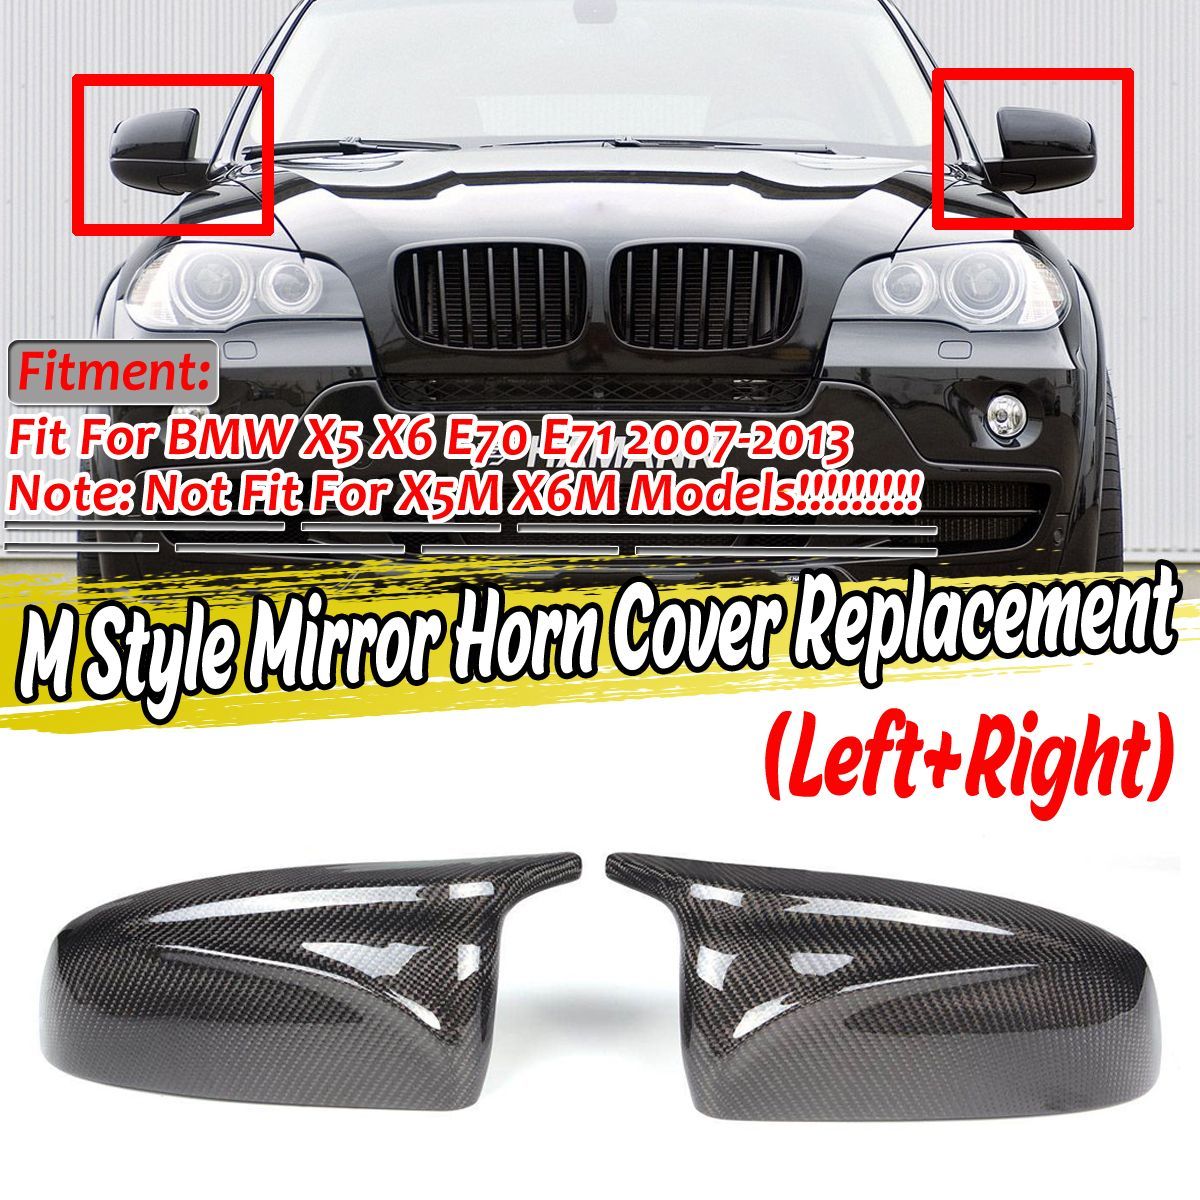 2Pcs-Car-Real-Carbon-Fiber-Rear-View-Mirror-Caps-Covers-Replacement-Left--Right-For-BMW-X5-X6-E70-E7-1662716